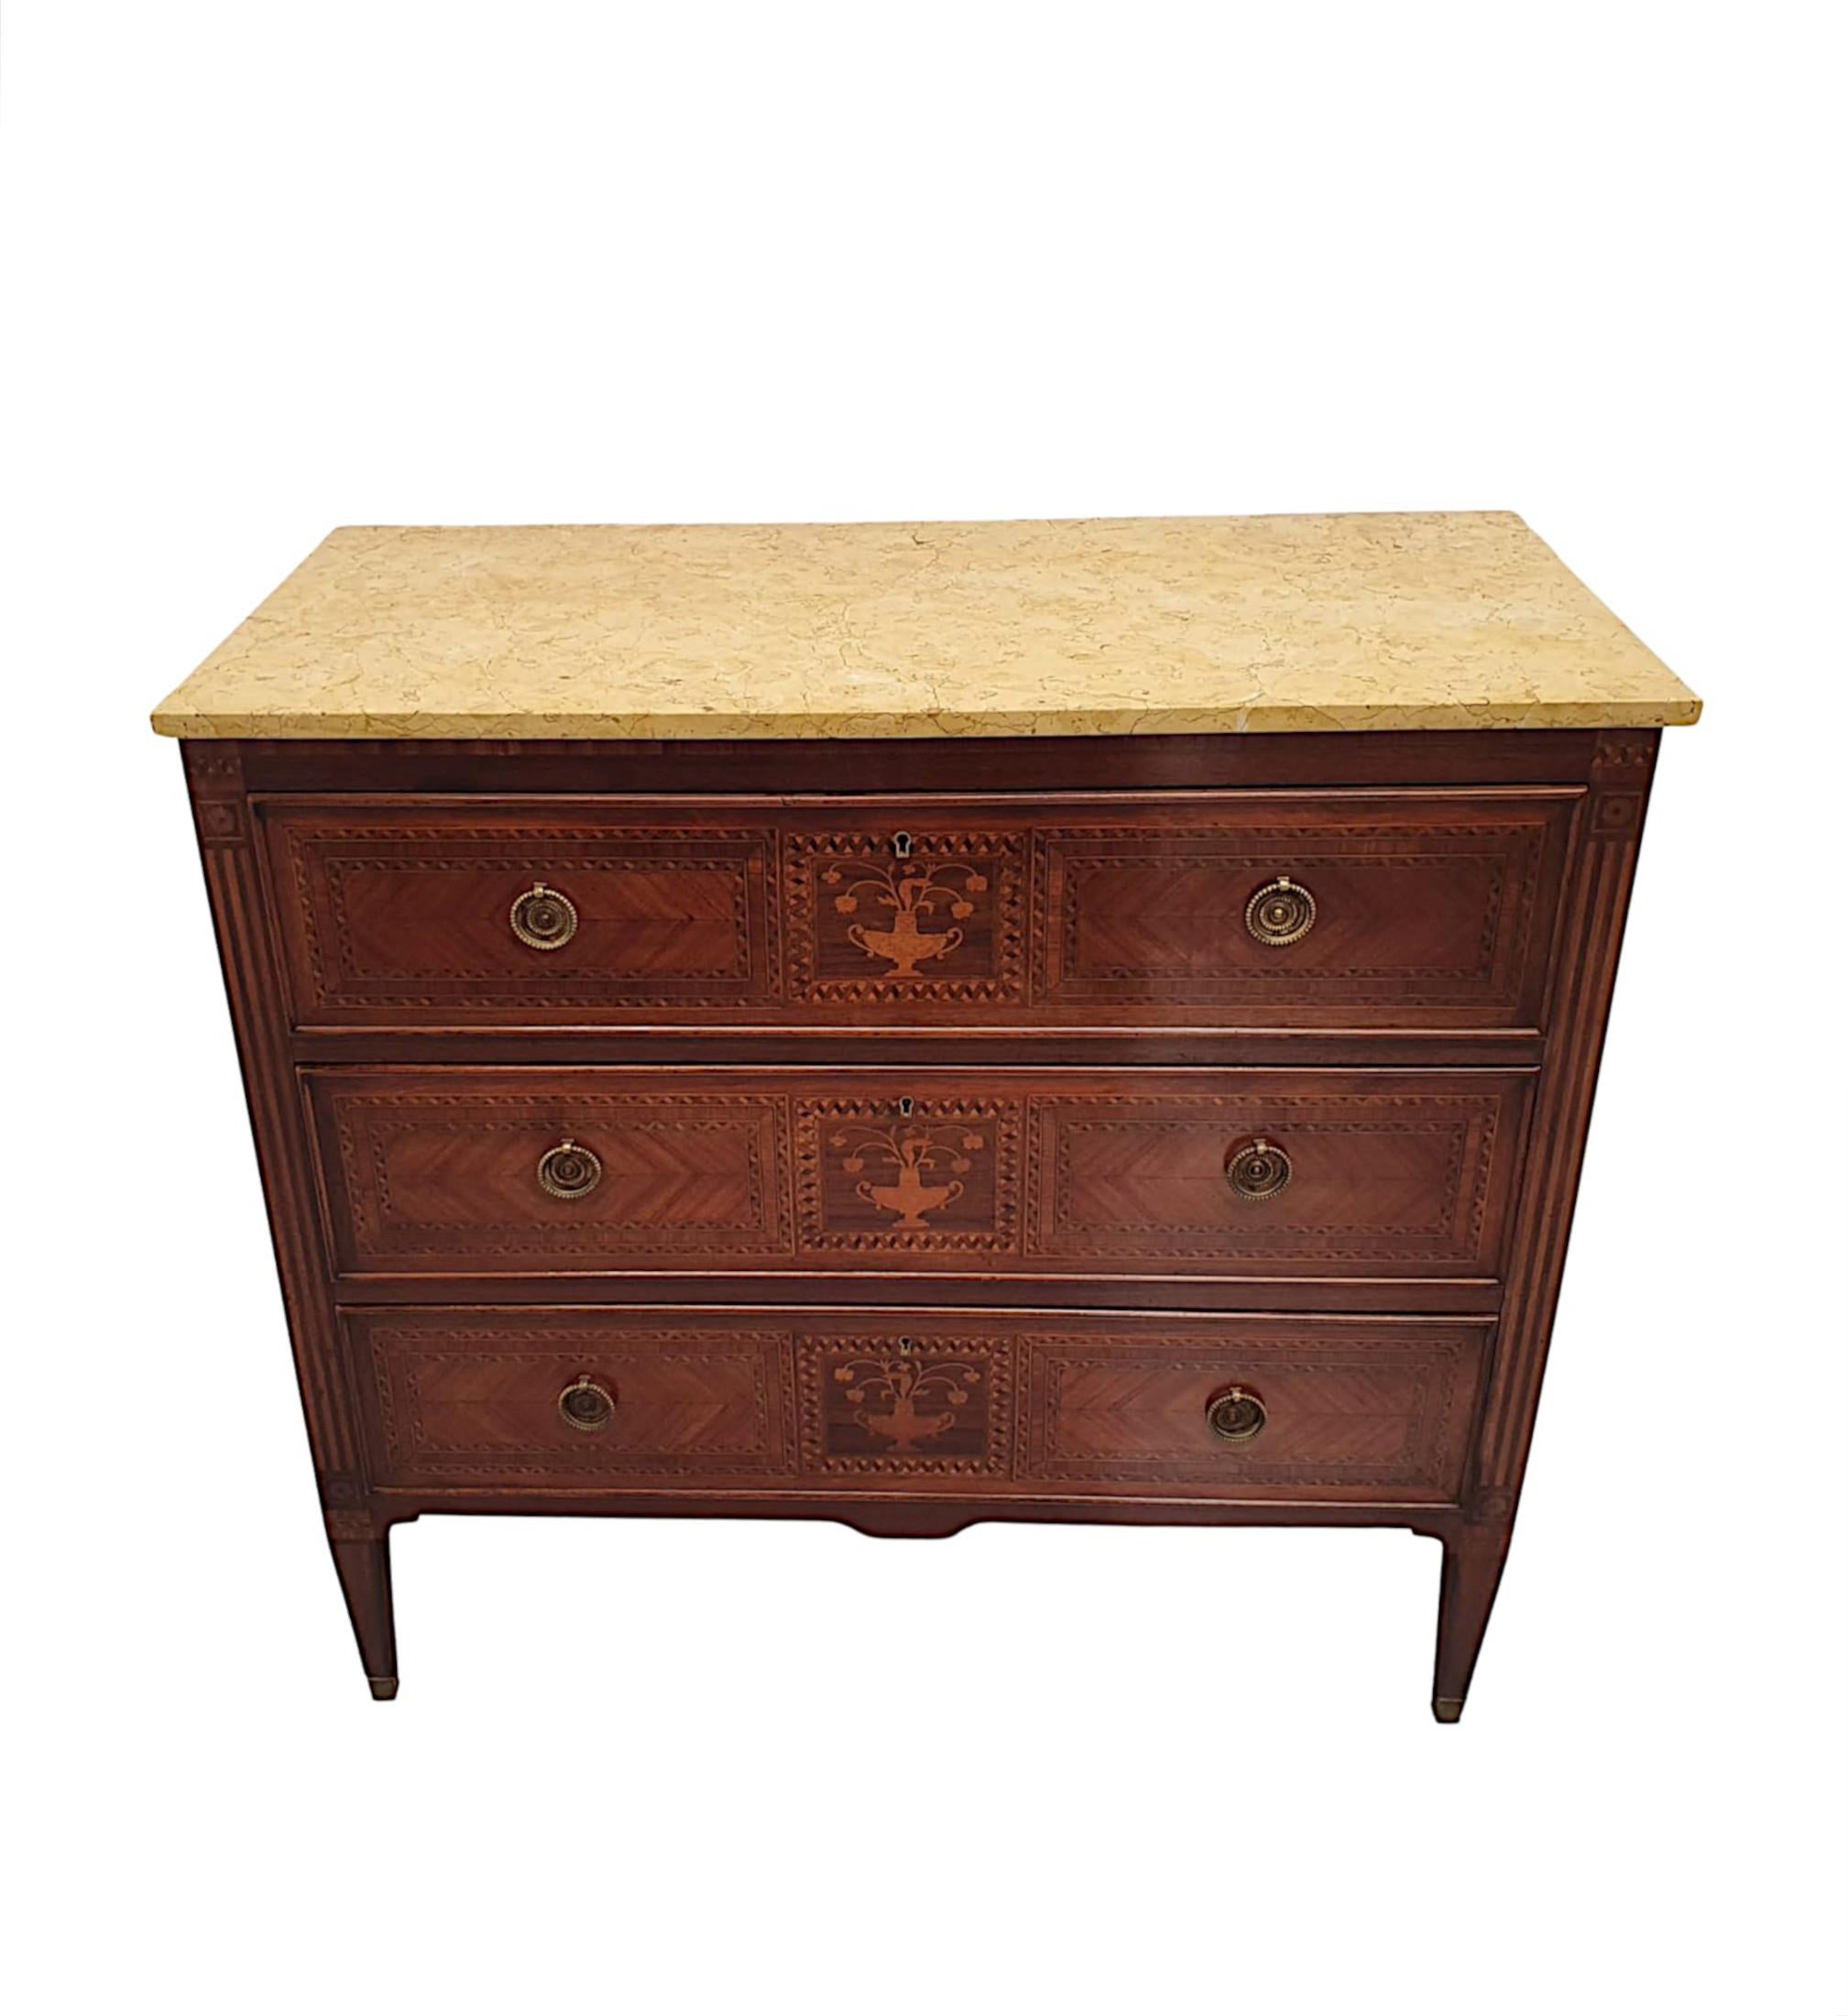 Italian A Fine Early 20th Century Highly Inlaid Marble Top Chest of Drawers For Sale